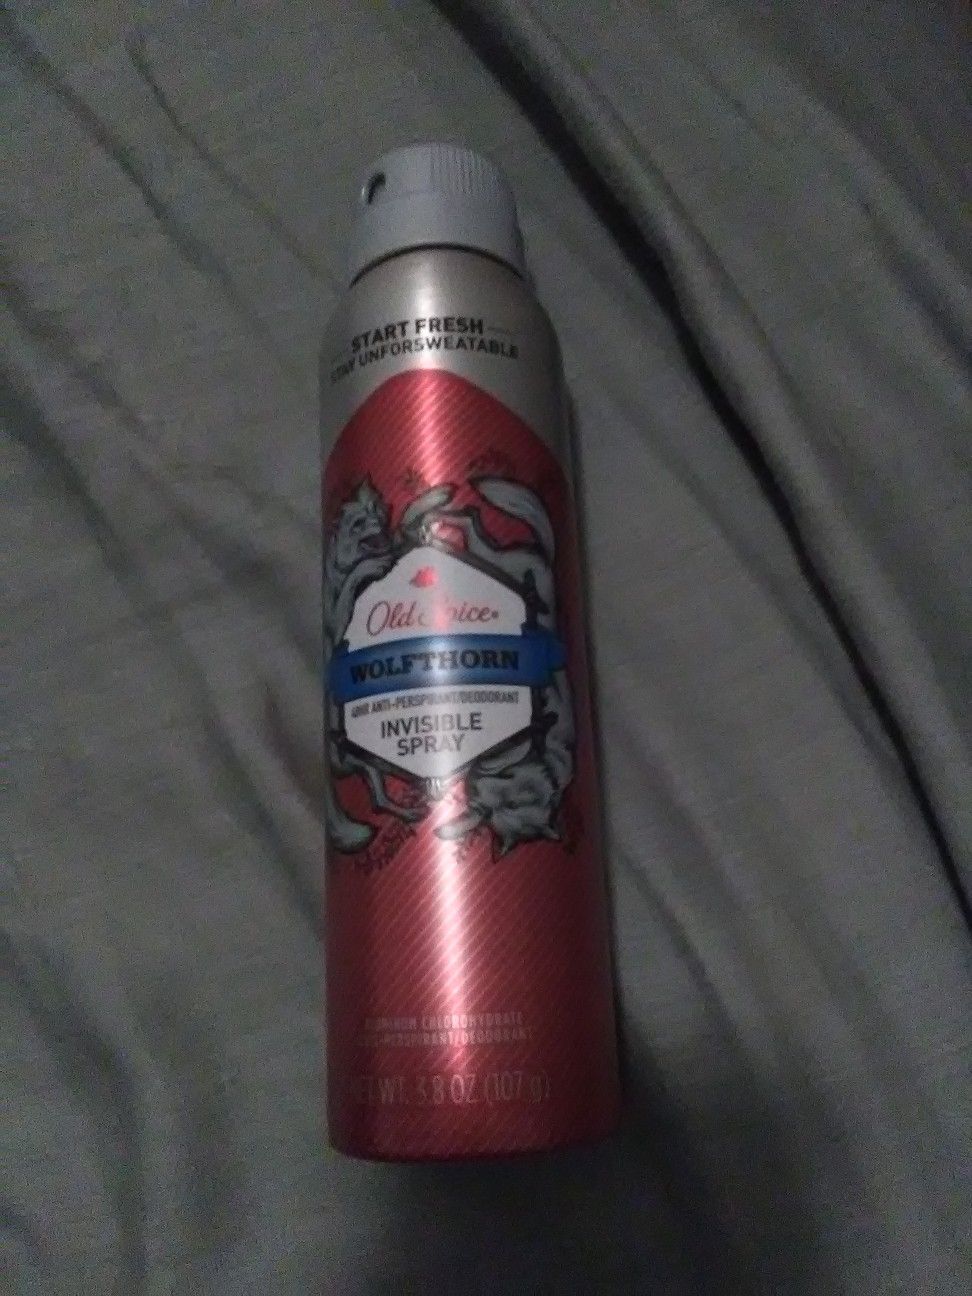 Old spice deodorant..$2 each or 3 for $5